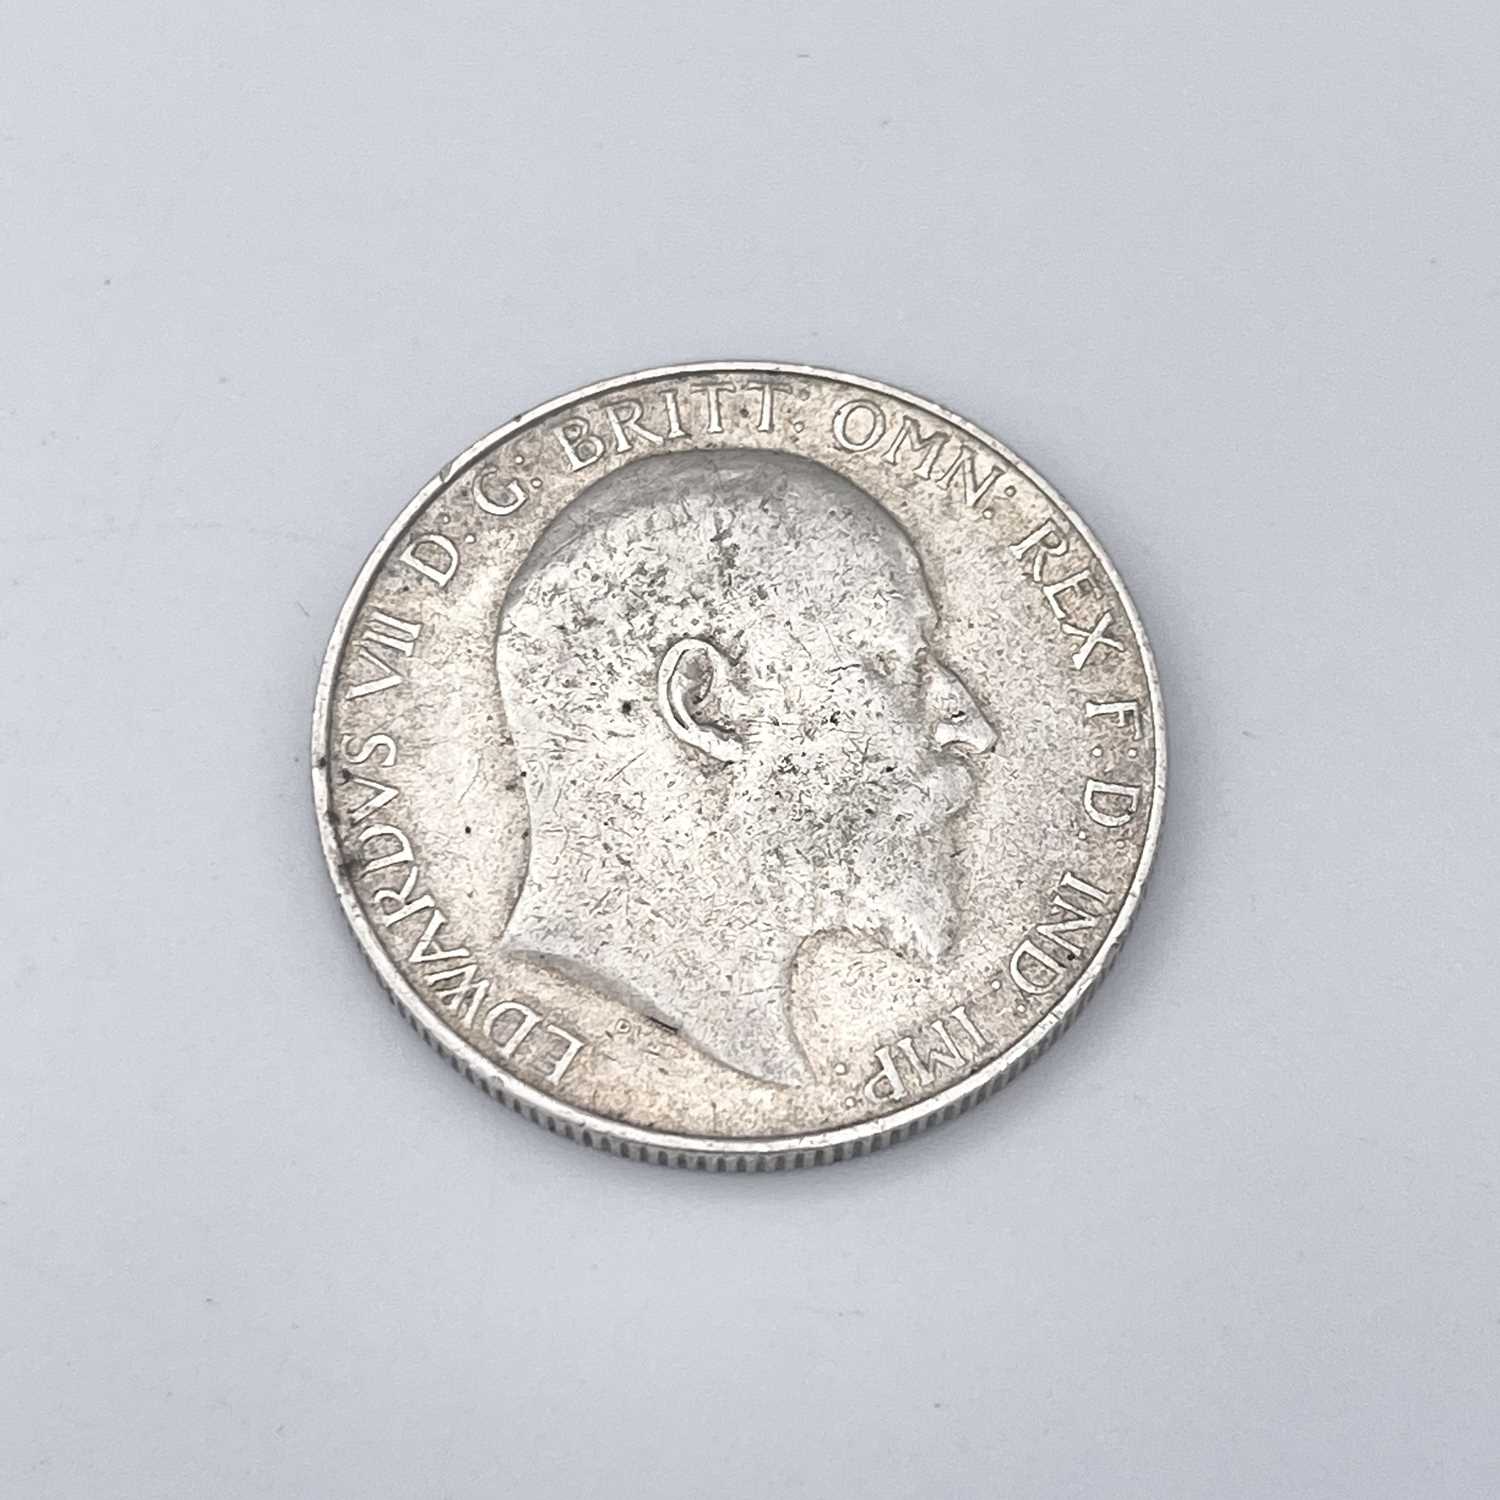 Great Britain King Edward VII 2/- coin RARE 1905 EXAMPLE (x1) Hard to find...